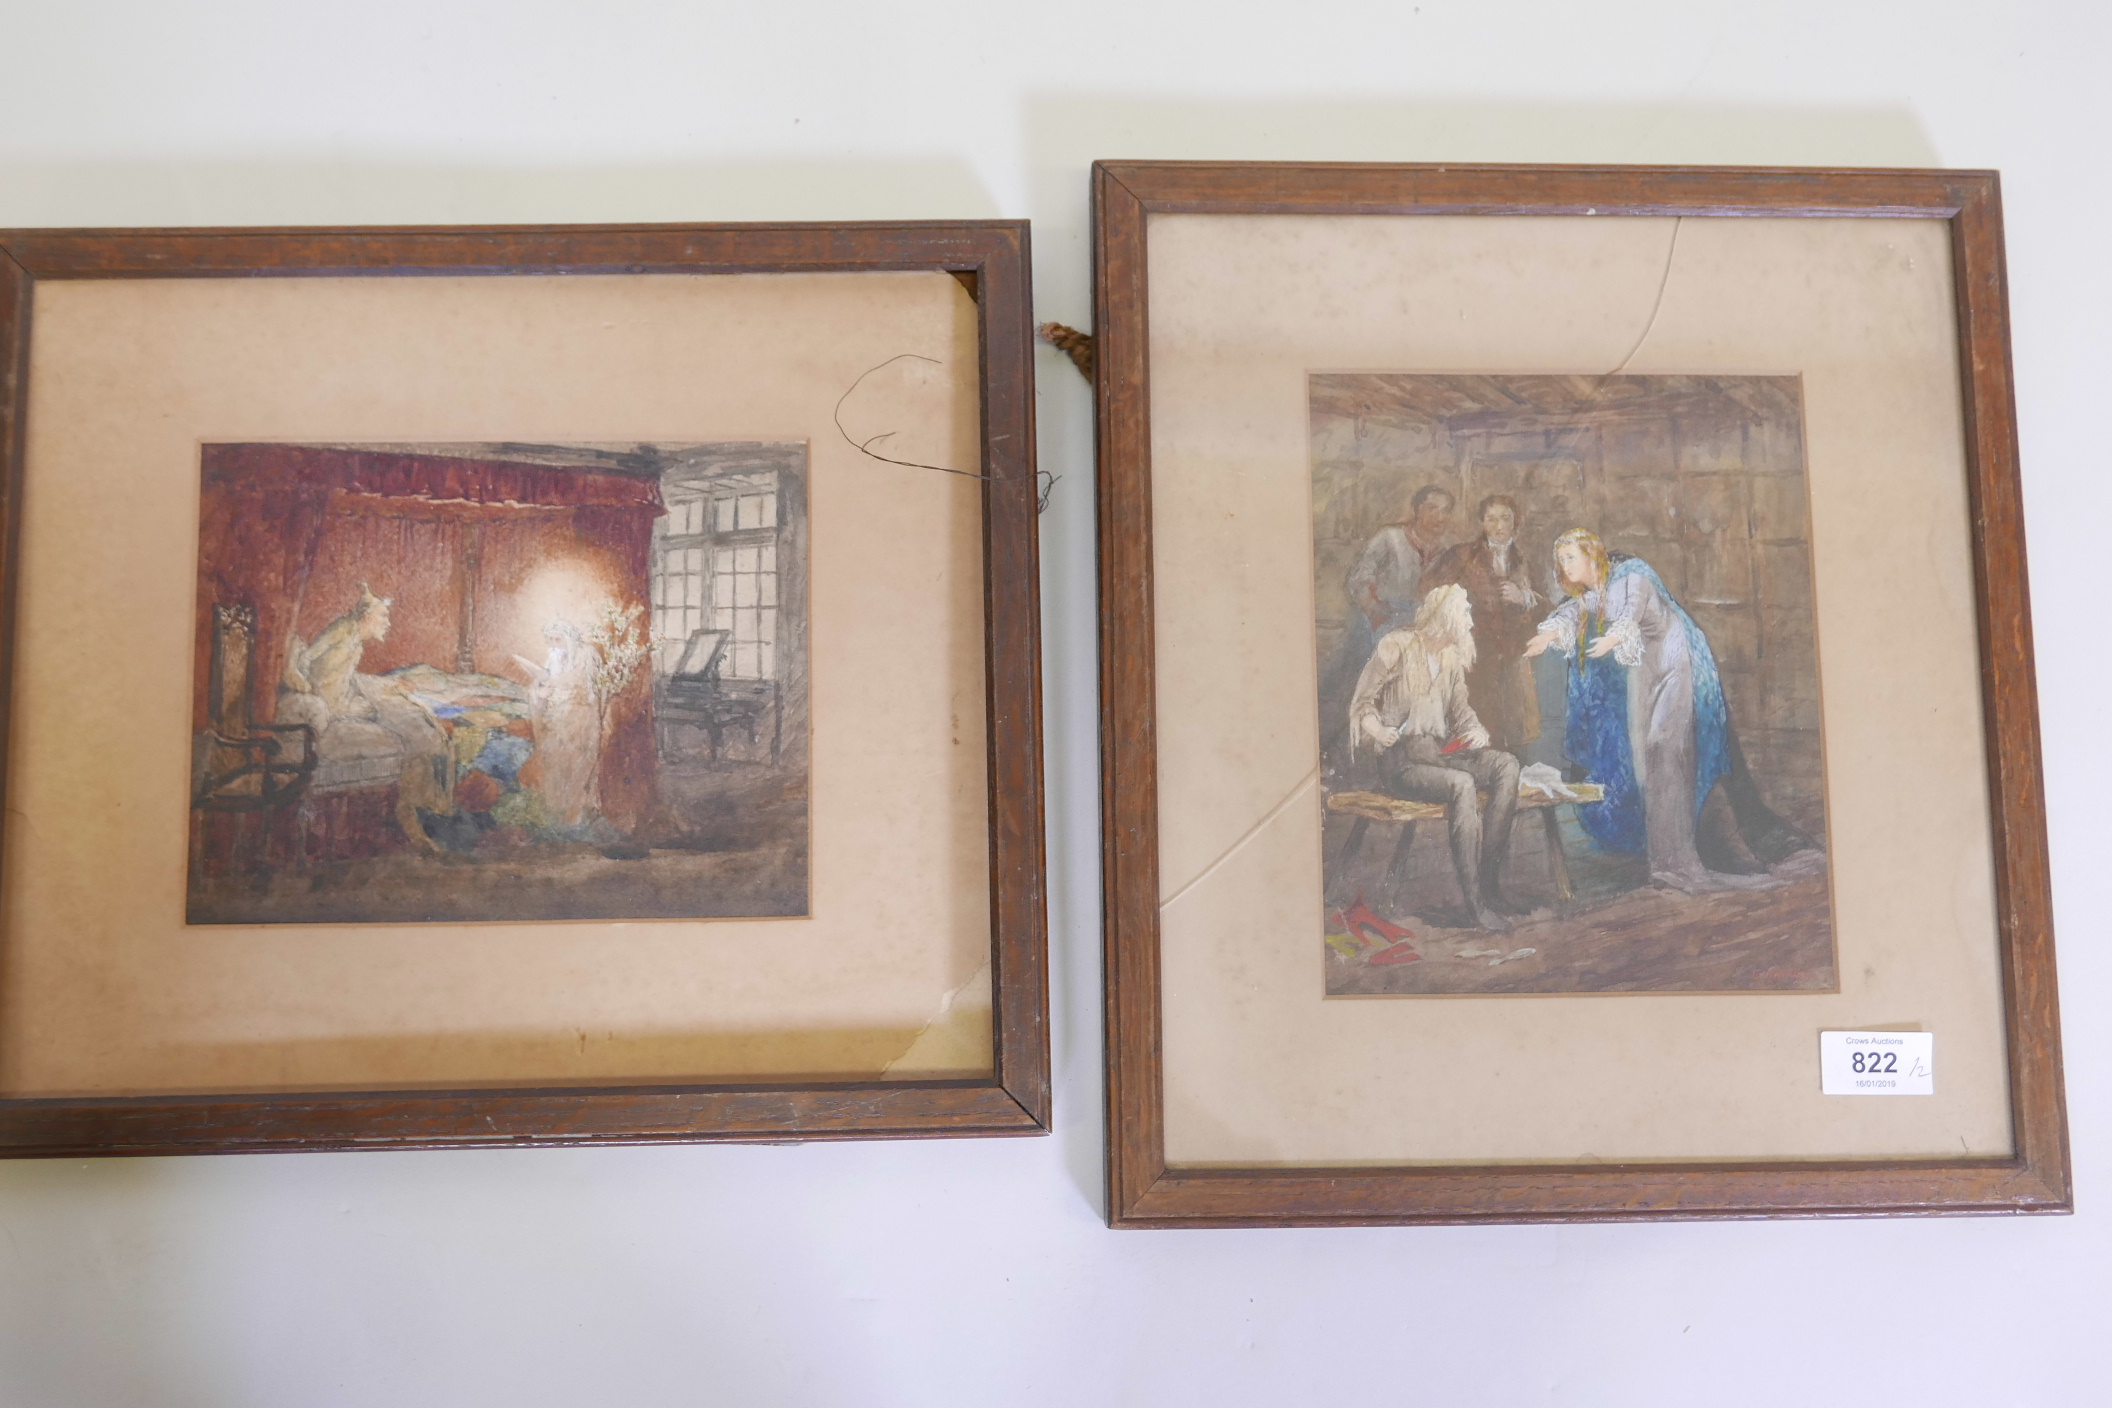 A watercolour, interior, possibly a scene from Dickens, and another by the same hand, signed E. - Image 3 of 3